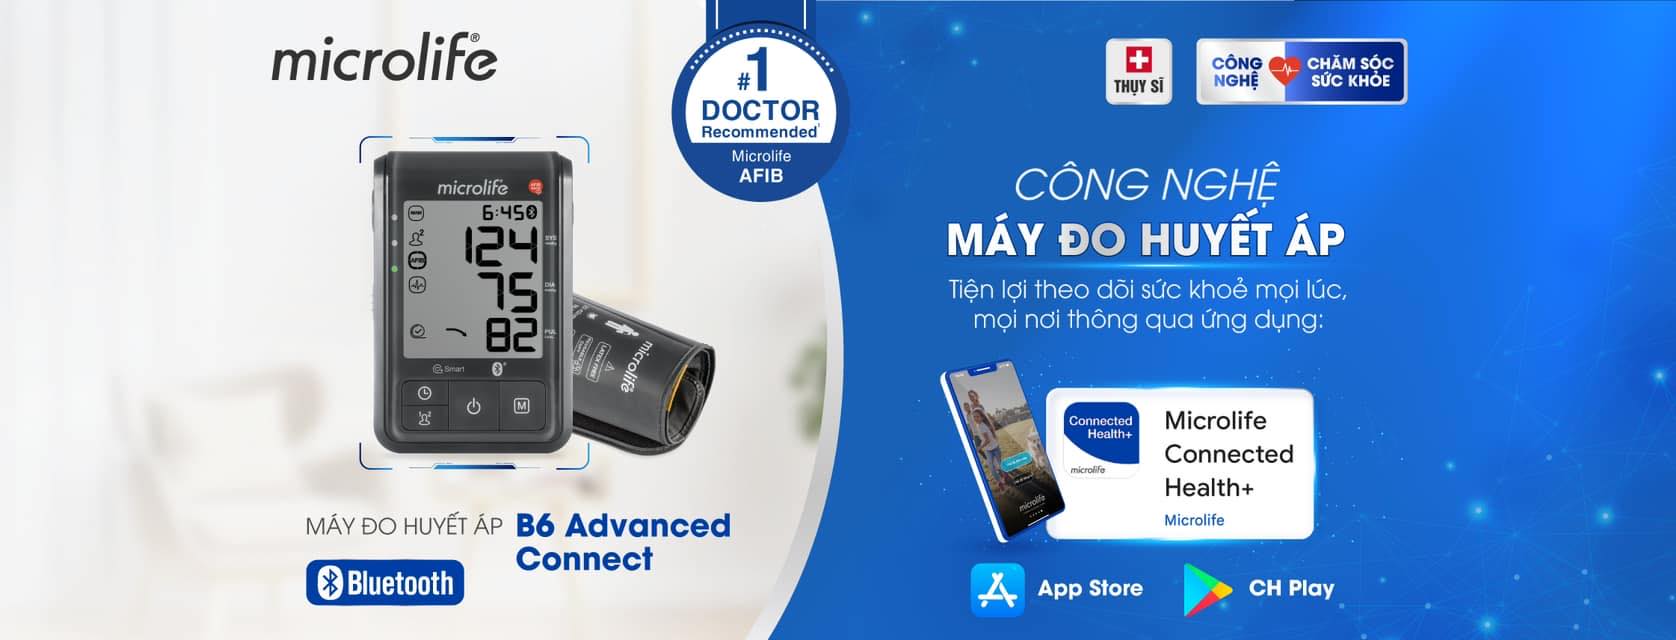 may do huyet ap b6 advanced connect